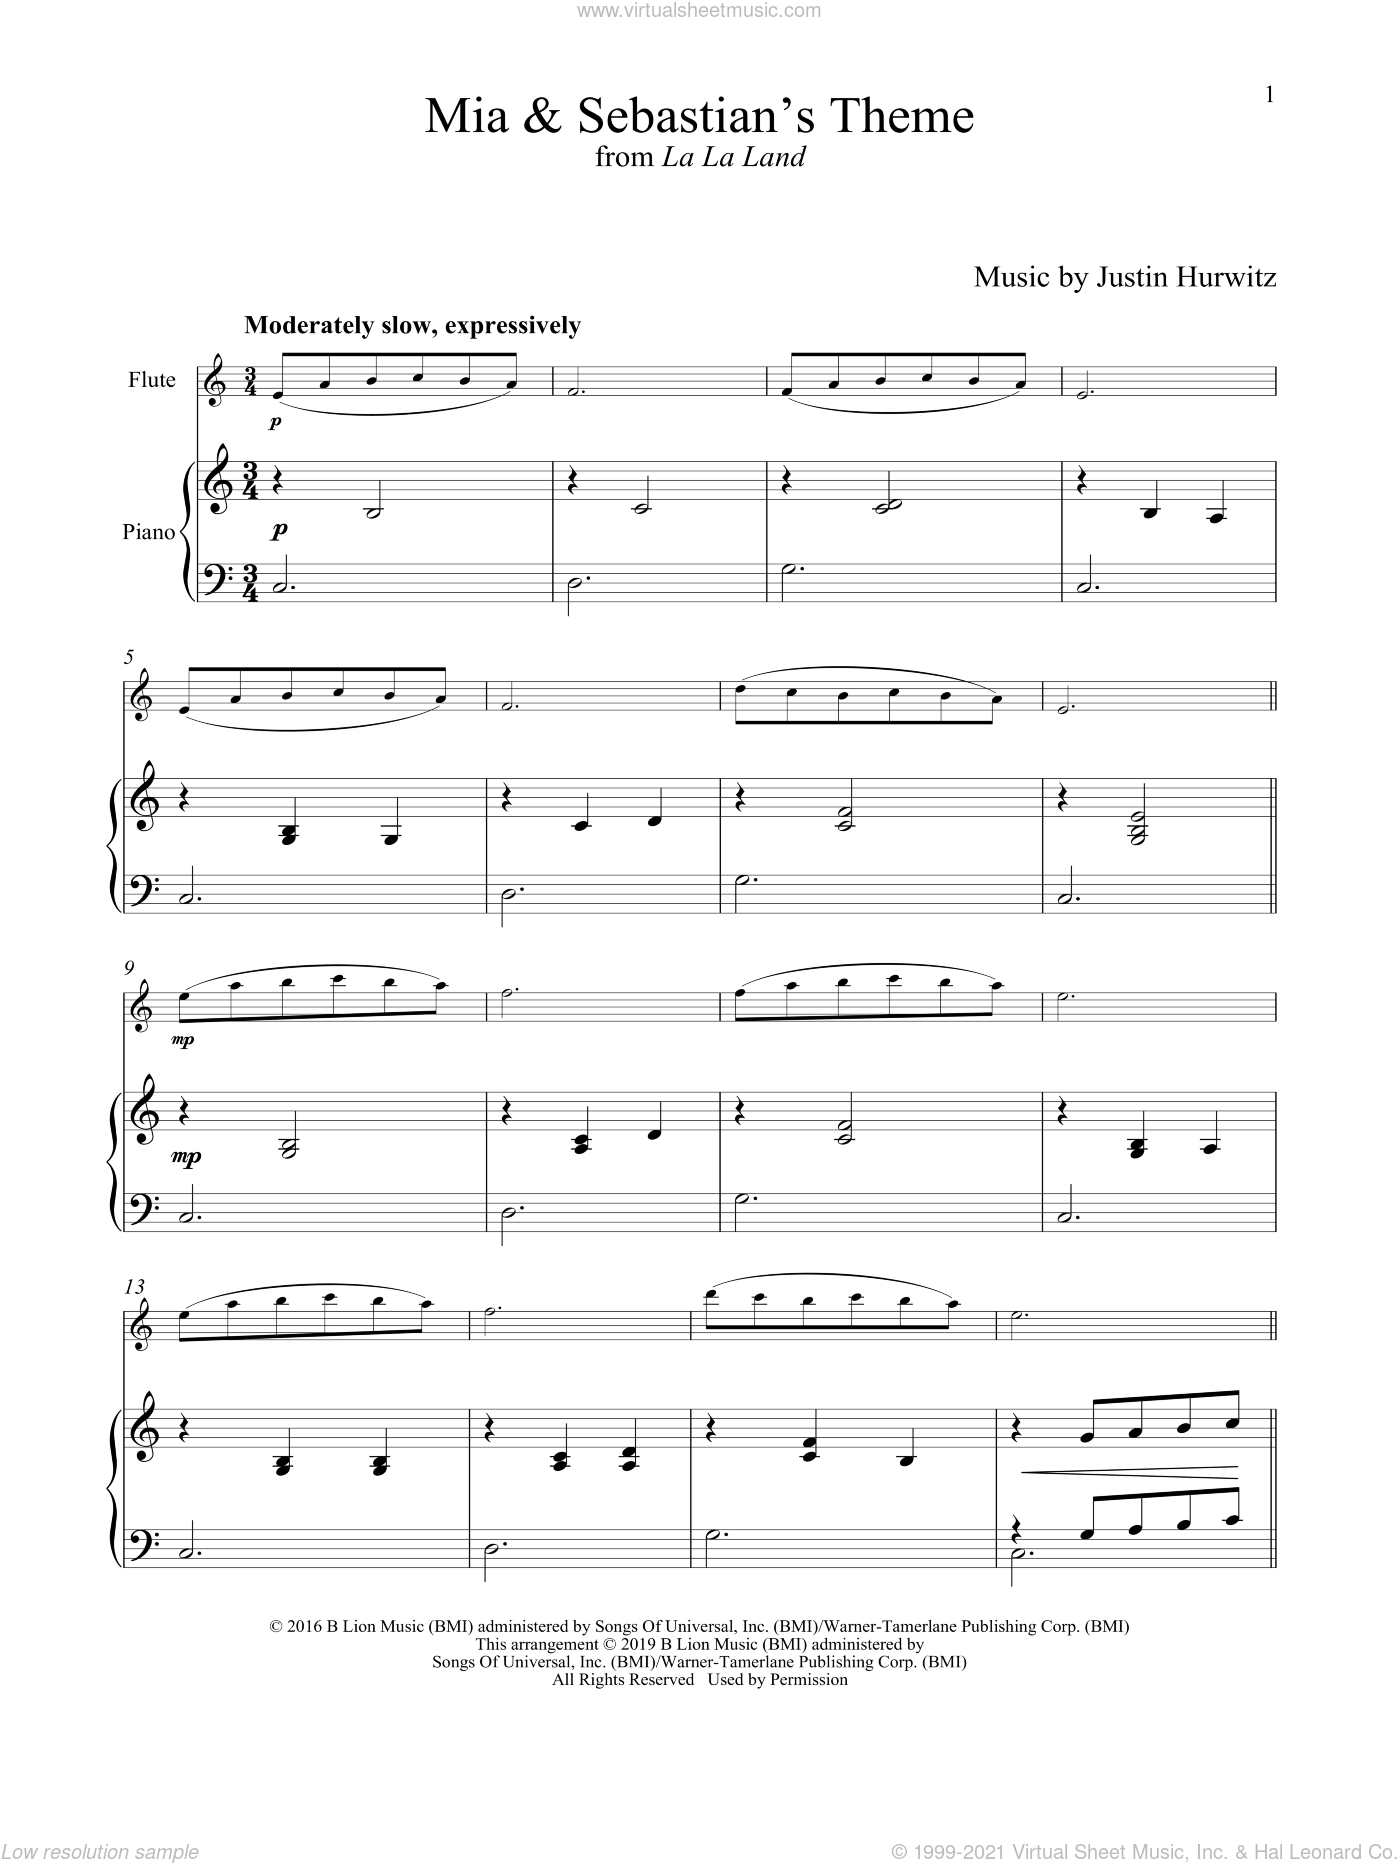 Mia and Sebastian's Theme (from La La Land) sheet music for flute and